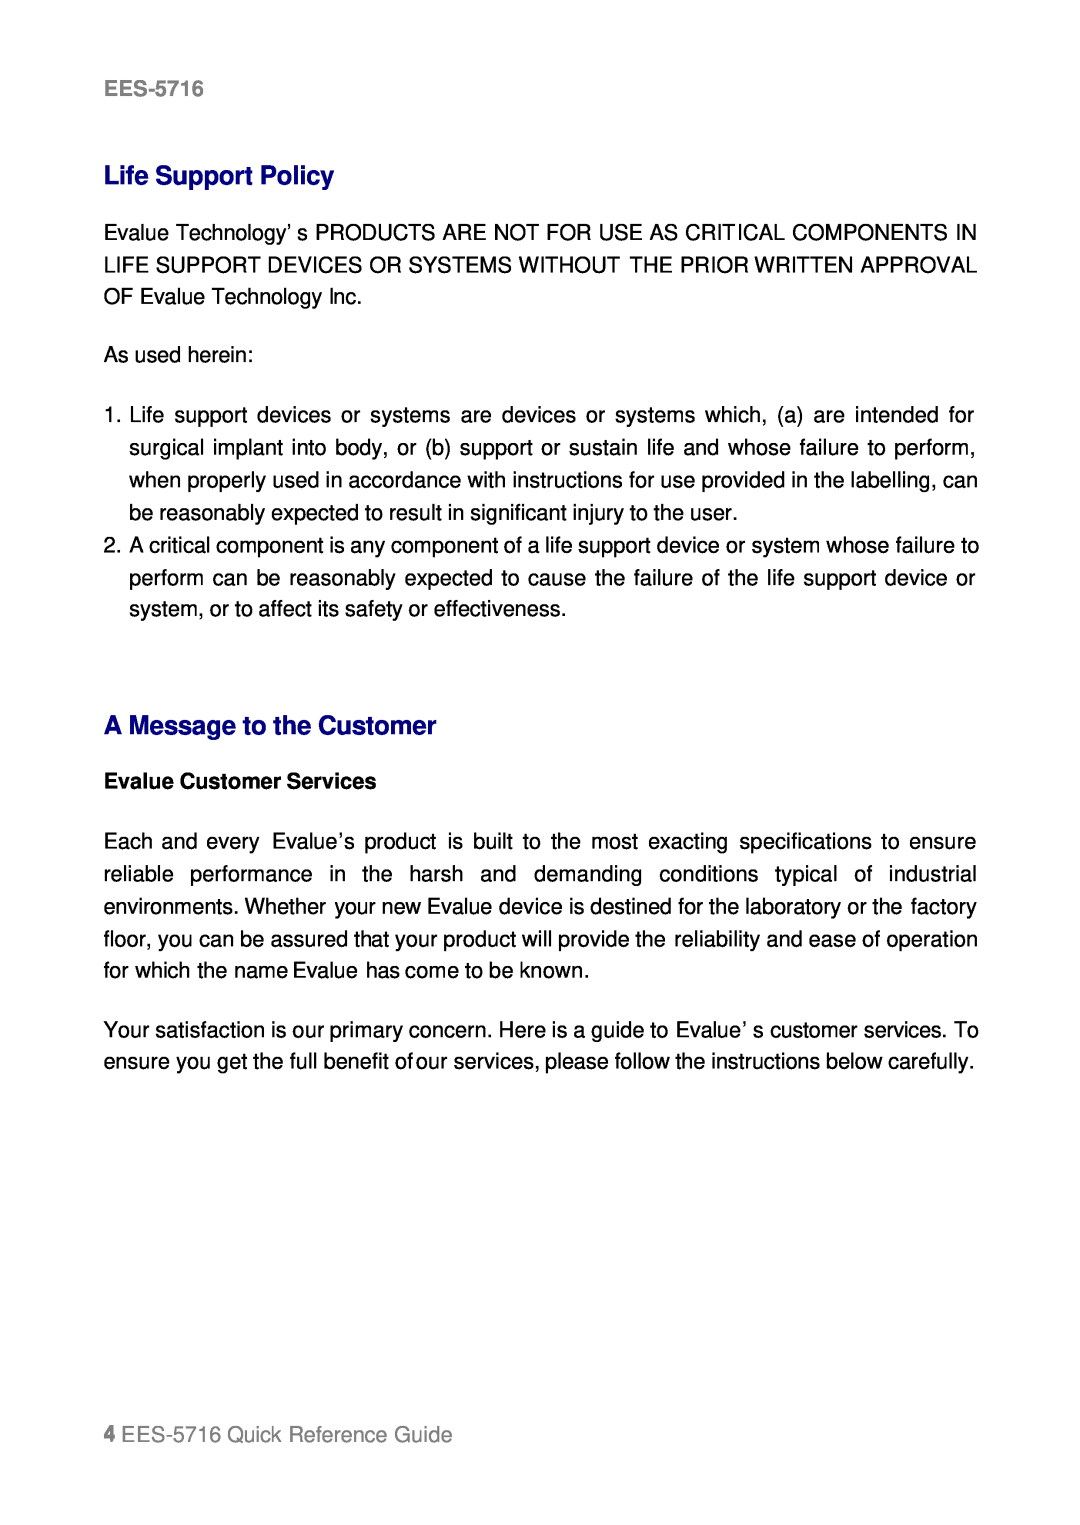 Intel manual Life Support Policy, A Message to the Customer, Evalue Customer Services, EES-5716Quick Reference Guide 